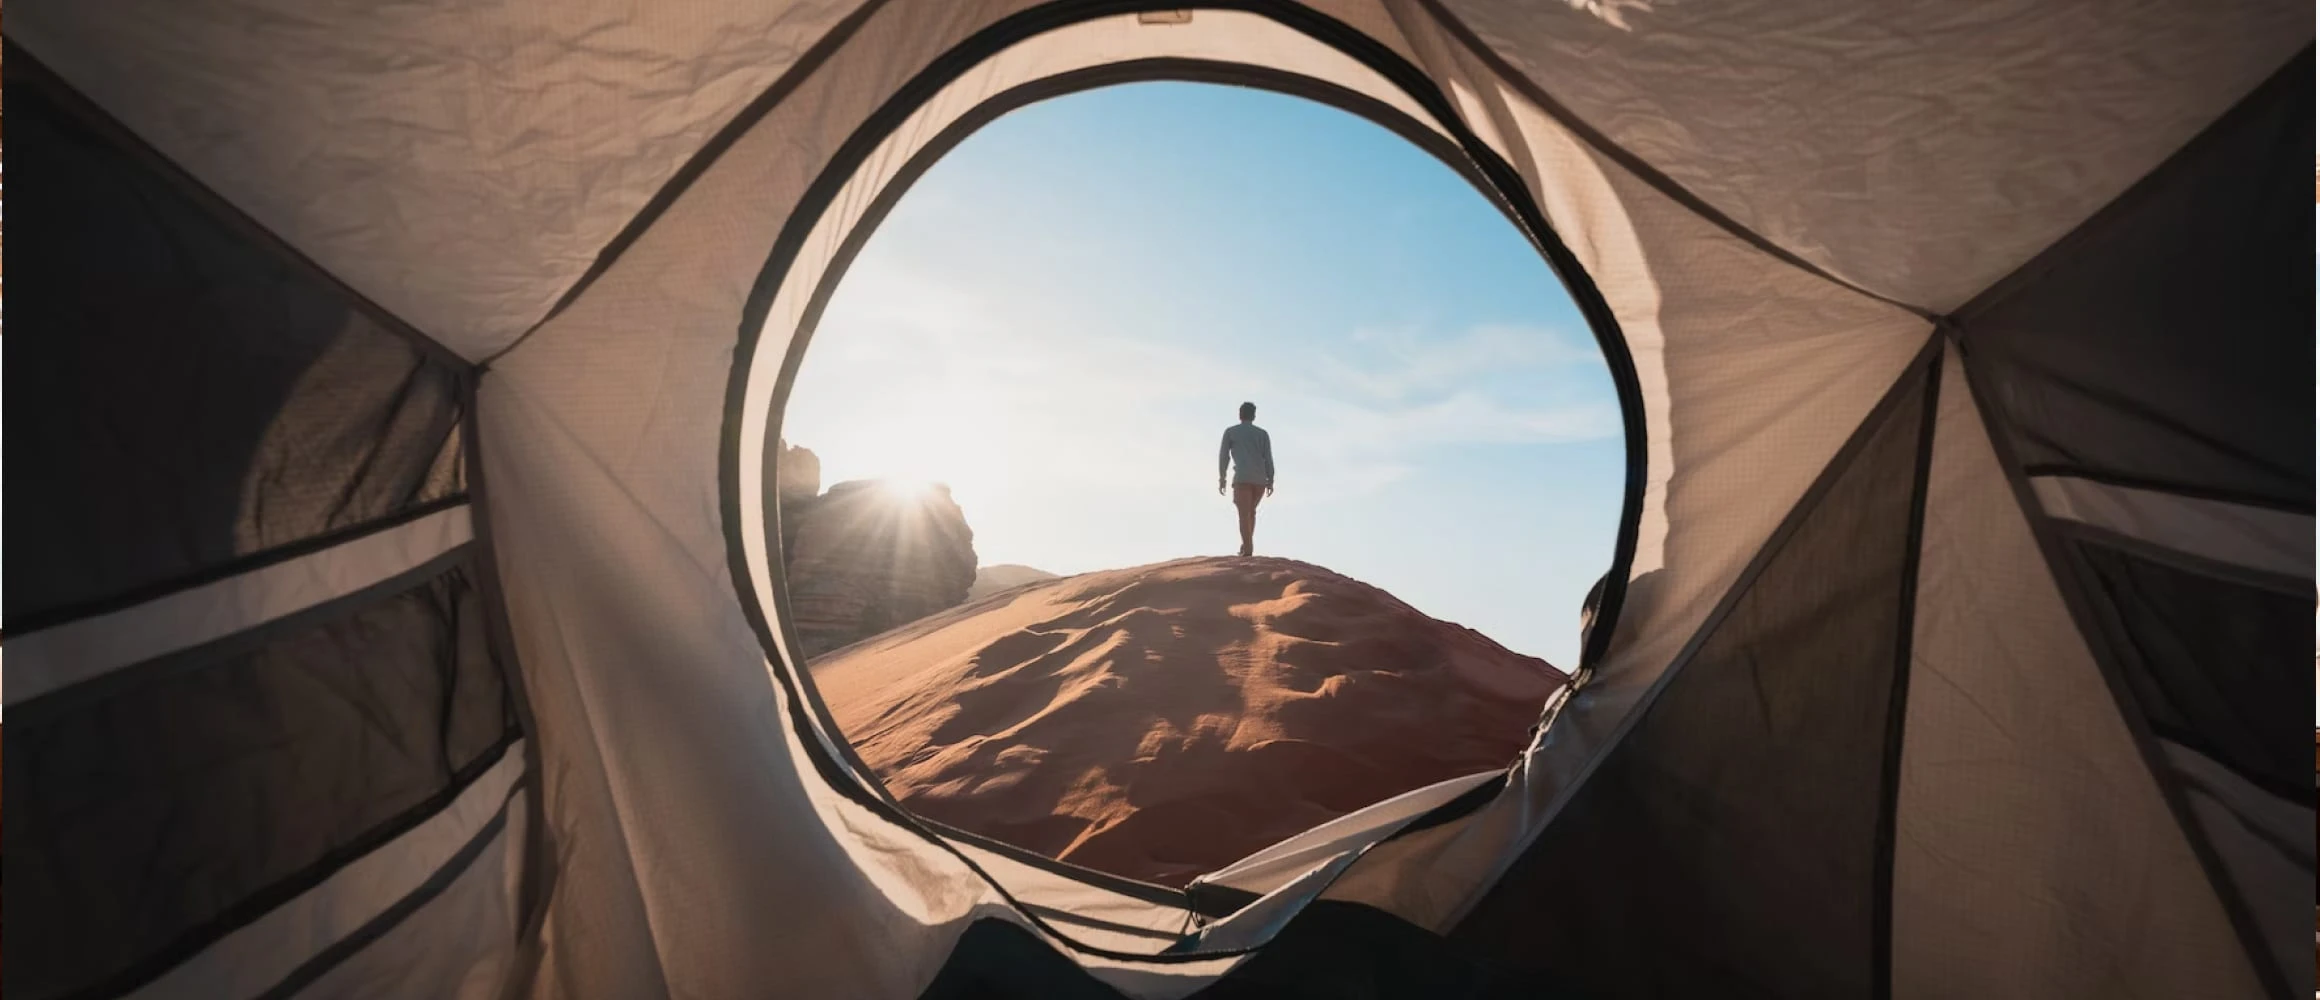 A man walking out of a tent and into sand dunes